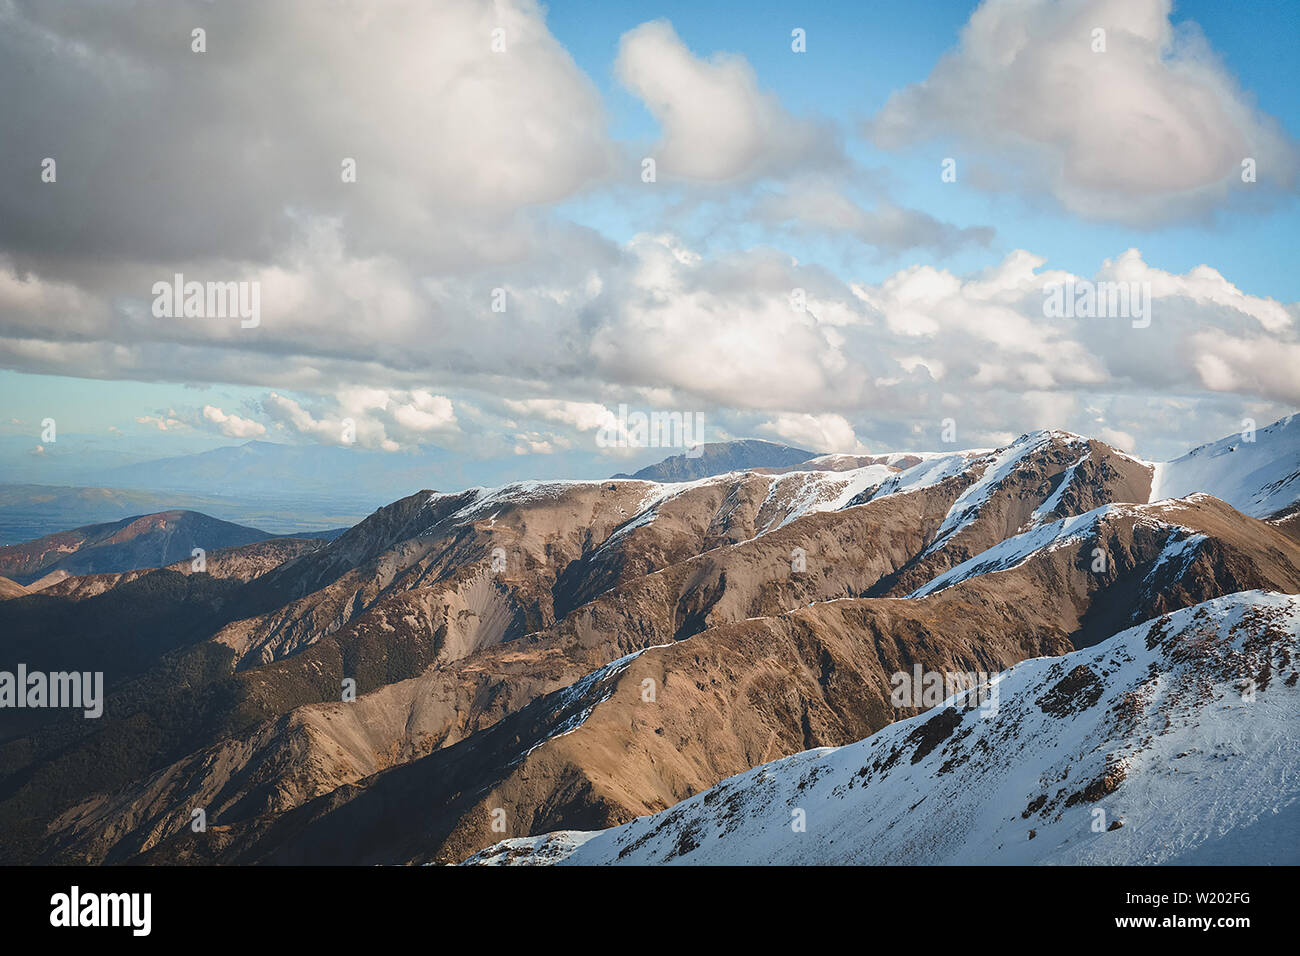 Snow Mountains in New Zealand atmosphere Stock Photo